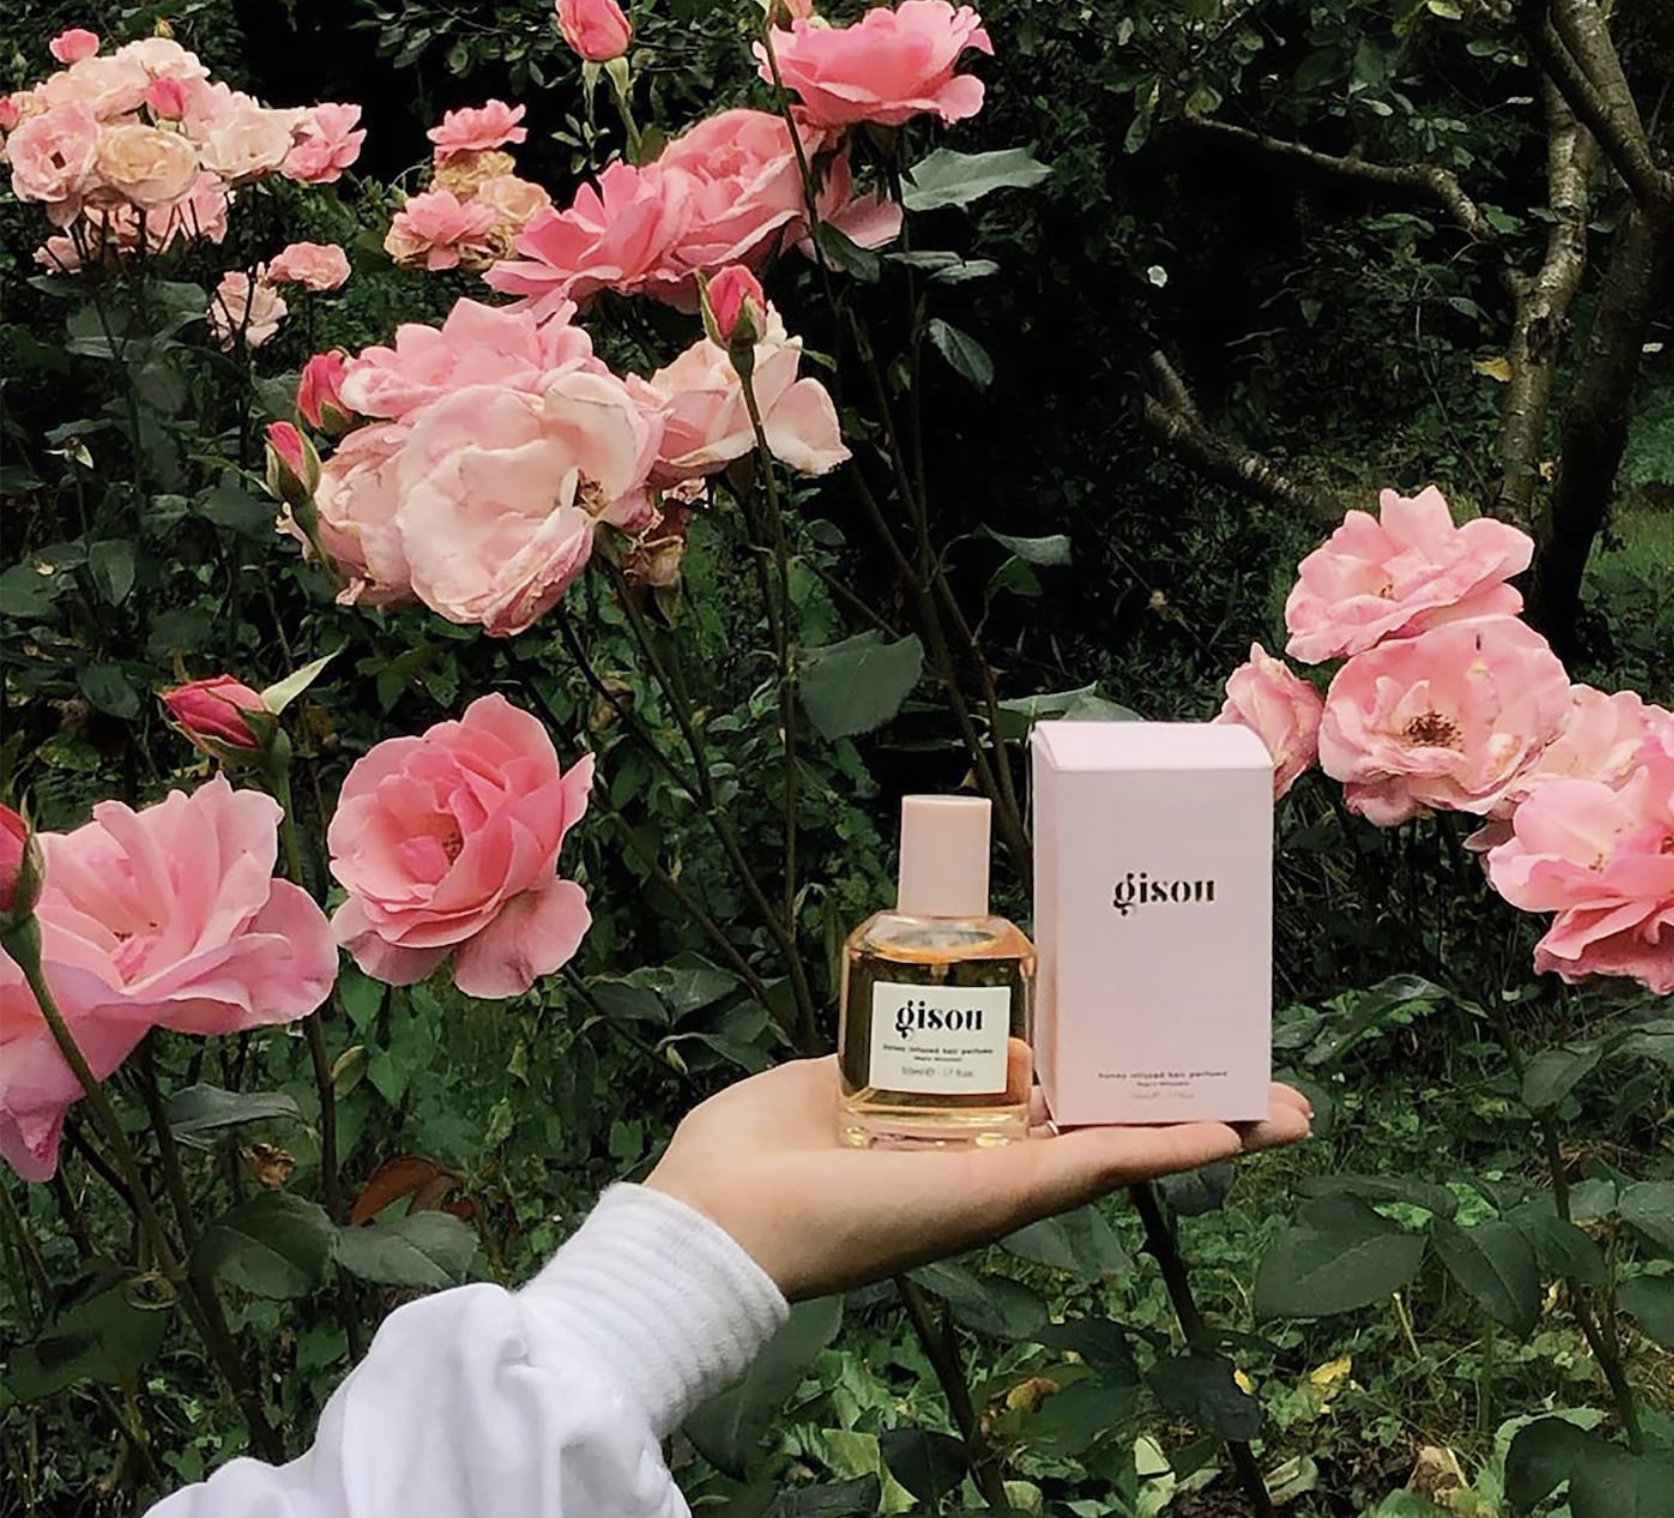 A person holding the perfume and its box in front of a rose bush